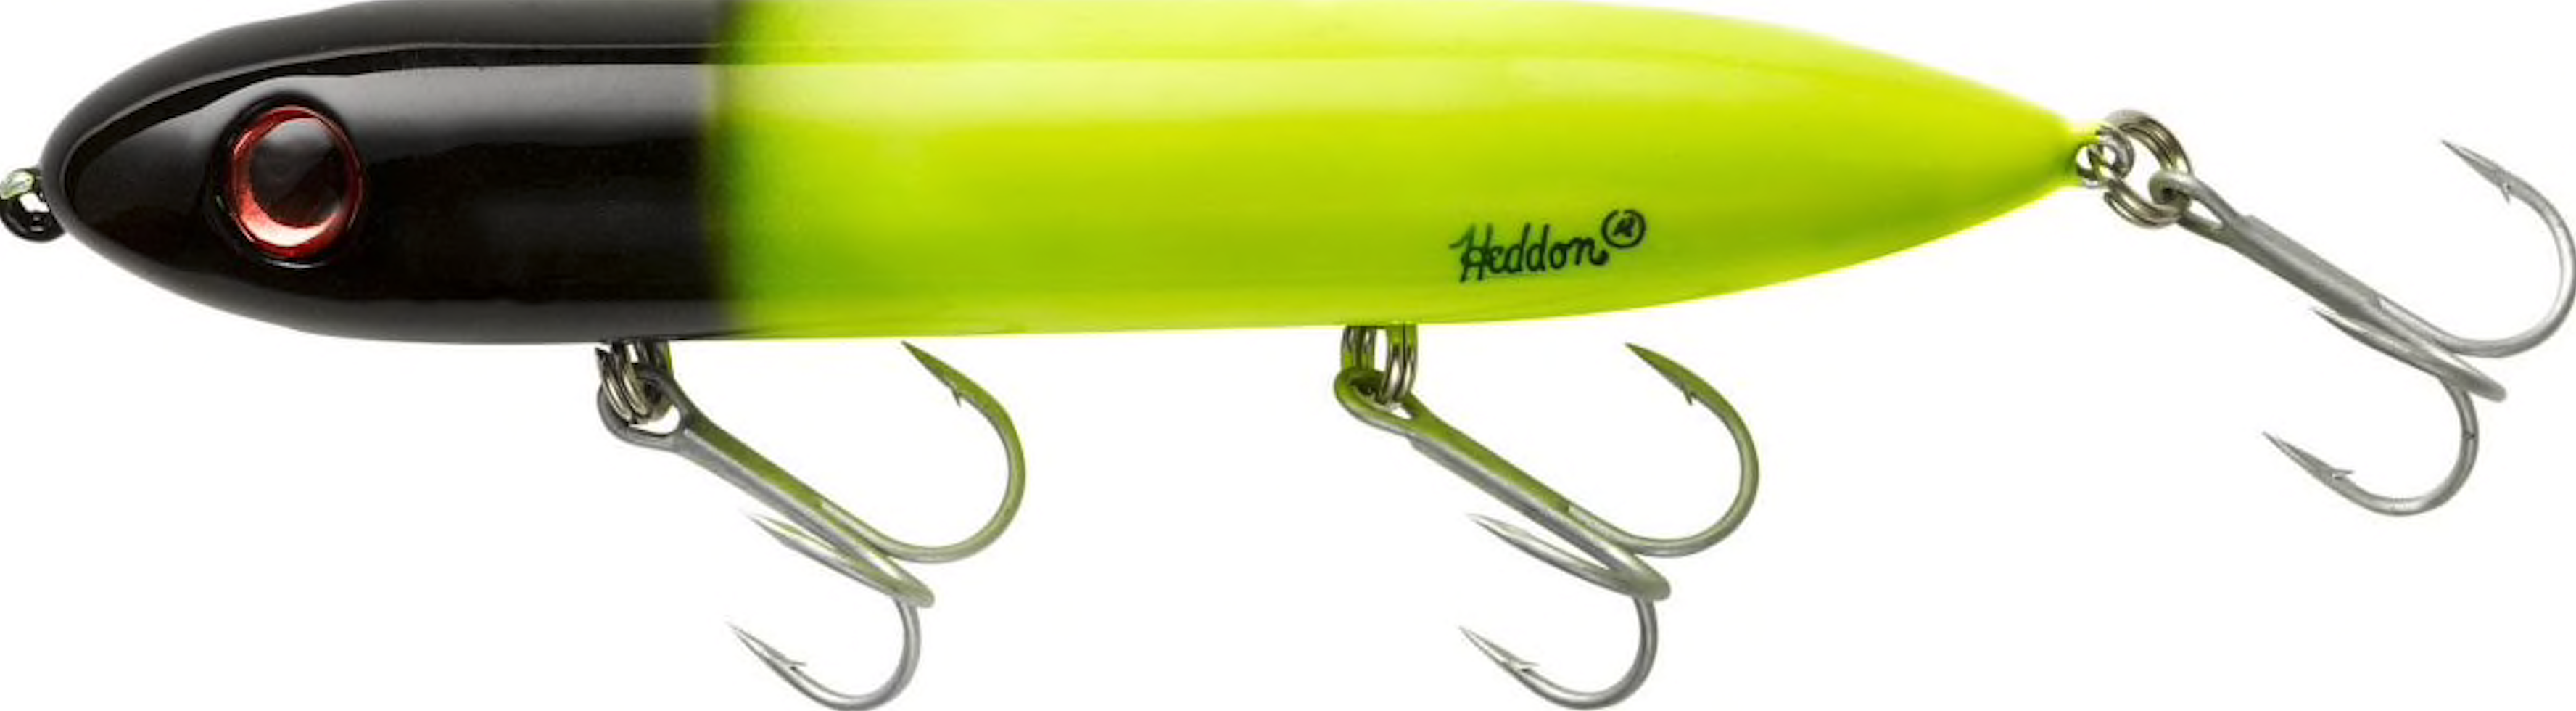 <h4>Walking Baits</h4><BR>The Heddon Zara Spook is hardly a new lure. In fact, a wooden version of the bait called the âZaragossa 6500 Seriesâ was introduced way back in 1939. But the Spook and its famous âwalk-the-dogâ action seemed to really take off during the late 1980s â and itâs since spawned many interesting versions.